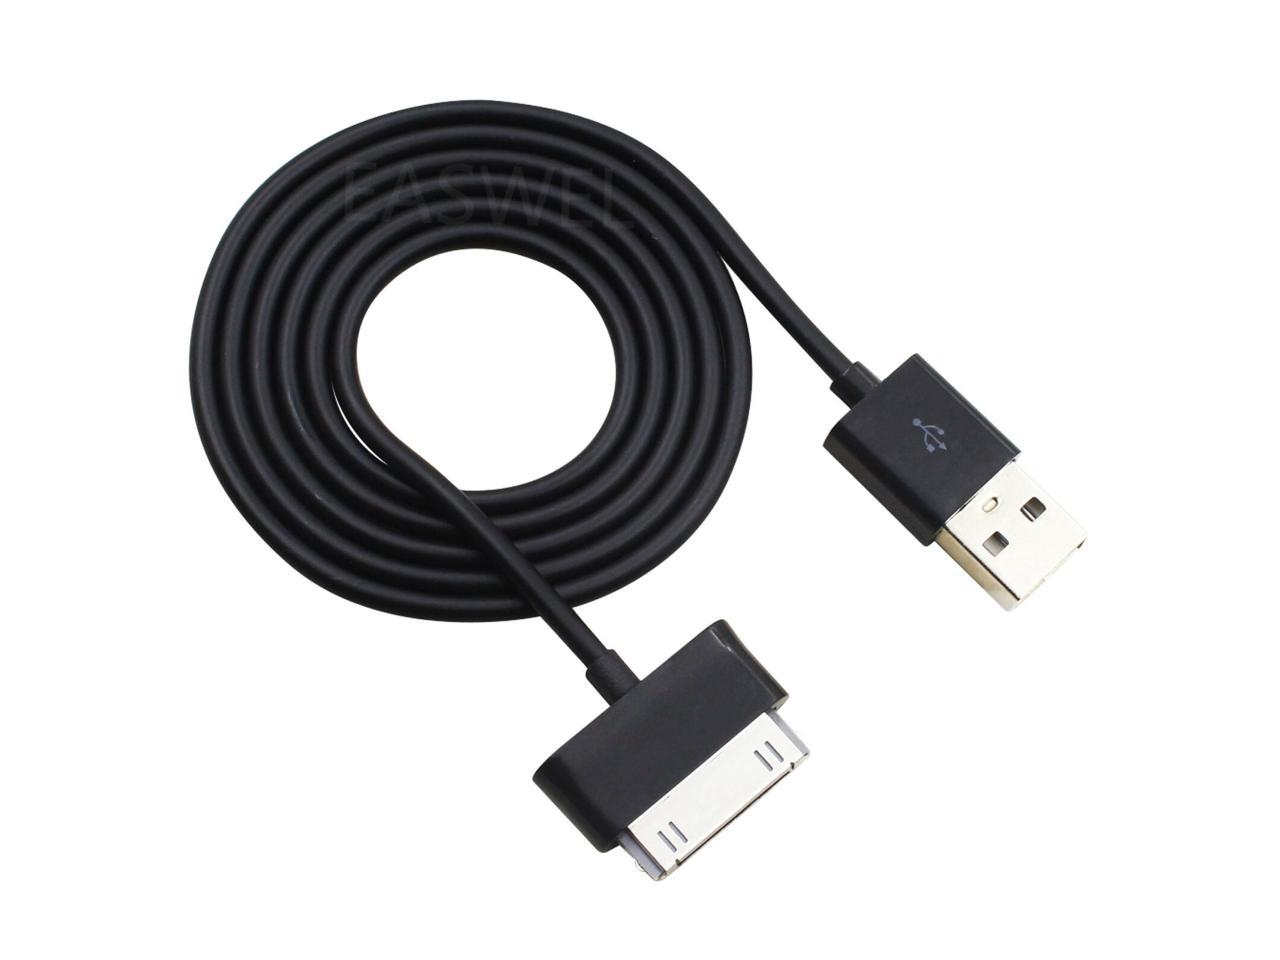 6.5FT USB Sync Charge Data Cable Cord for Samsung Galaxy note 10.1 N8000 